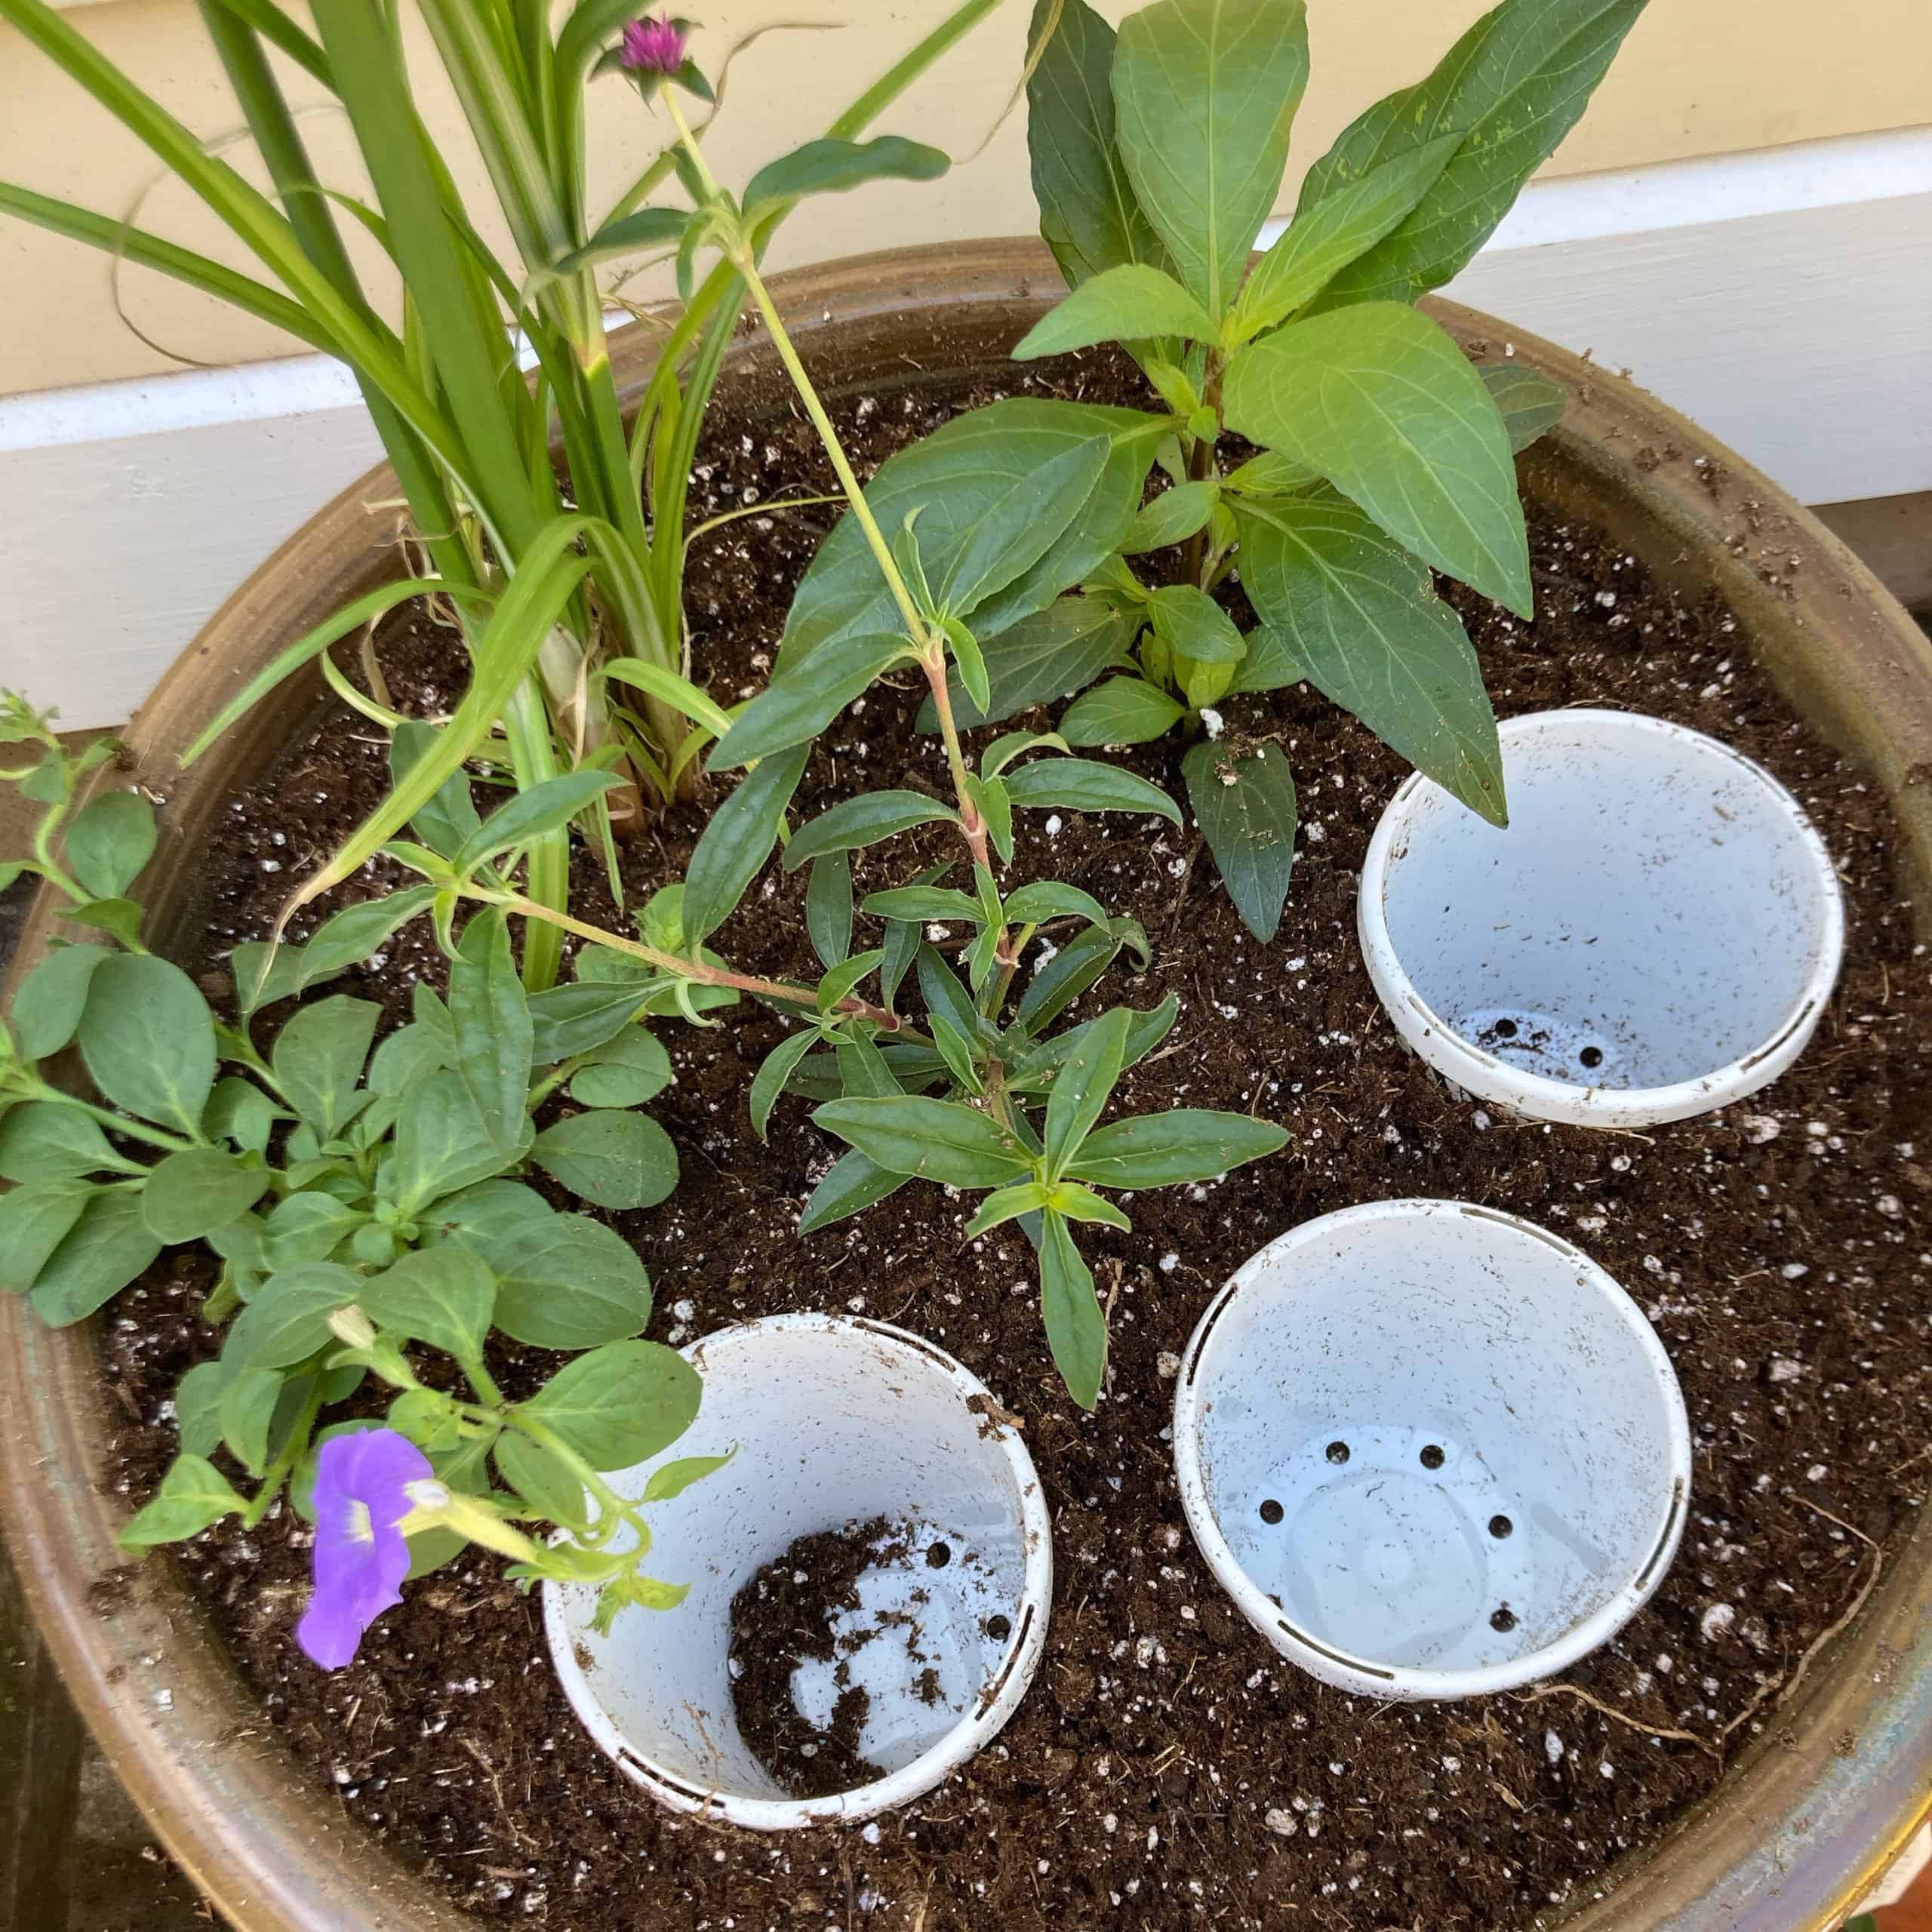 Planting a container